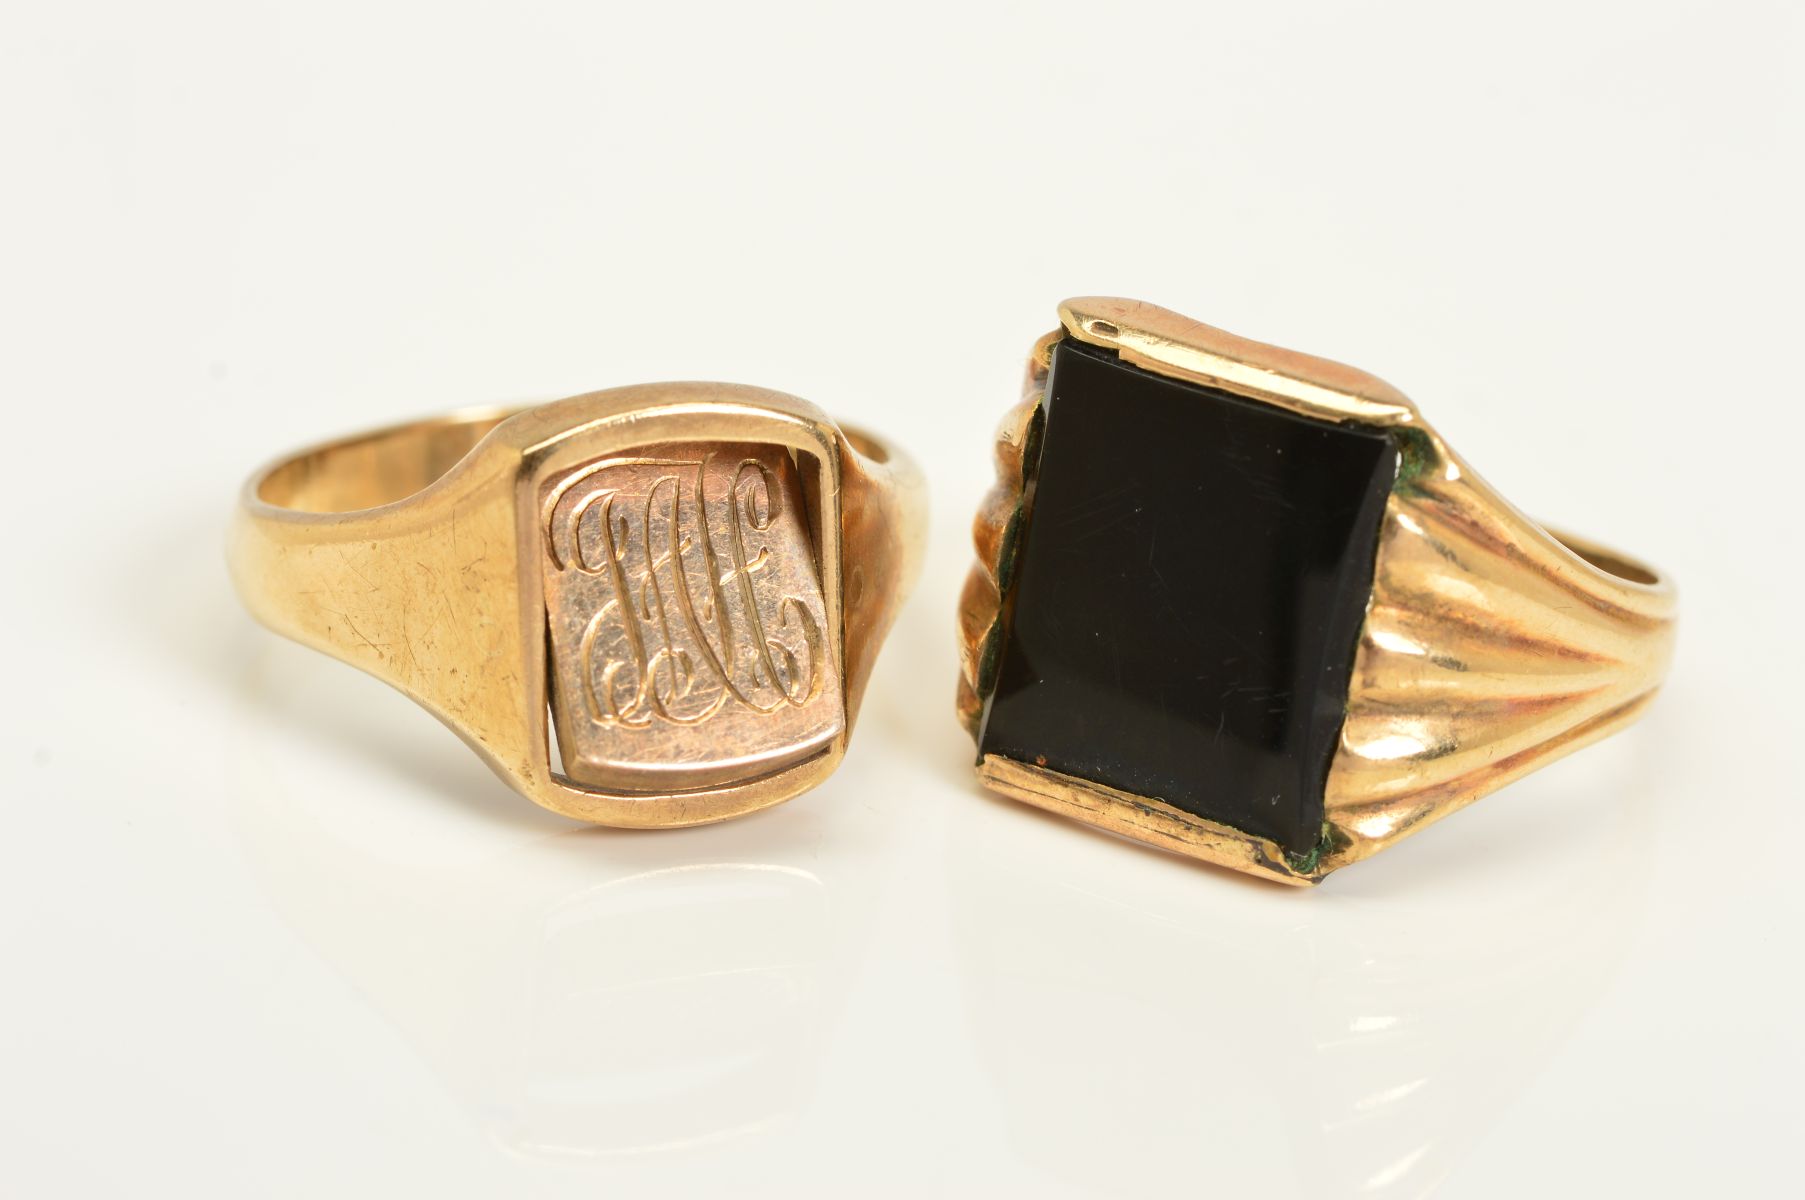 TWO GENTLEMAN'S RINGS, the first a 9ct gold ring, the central rectangular panel with engraved